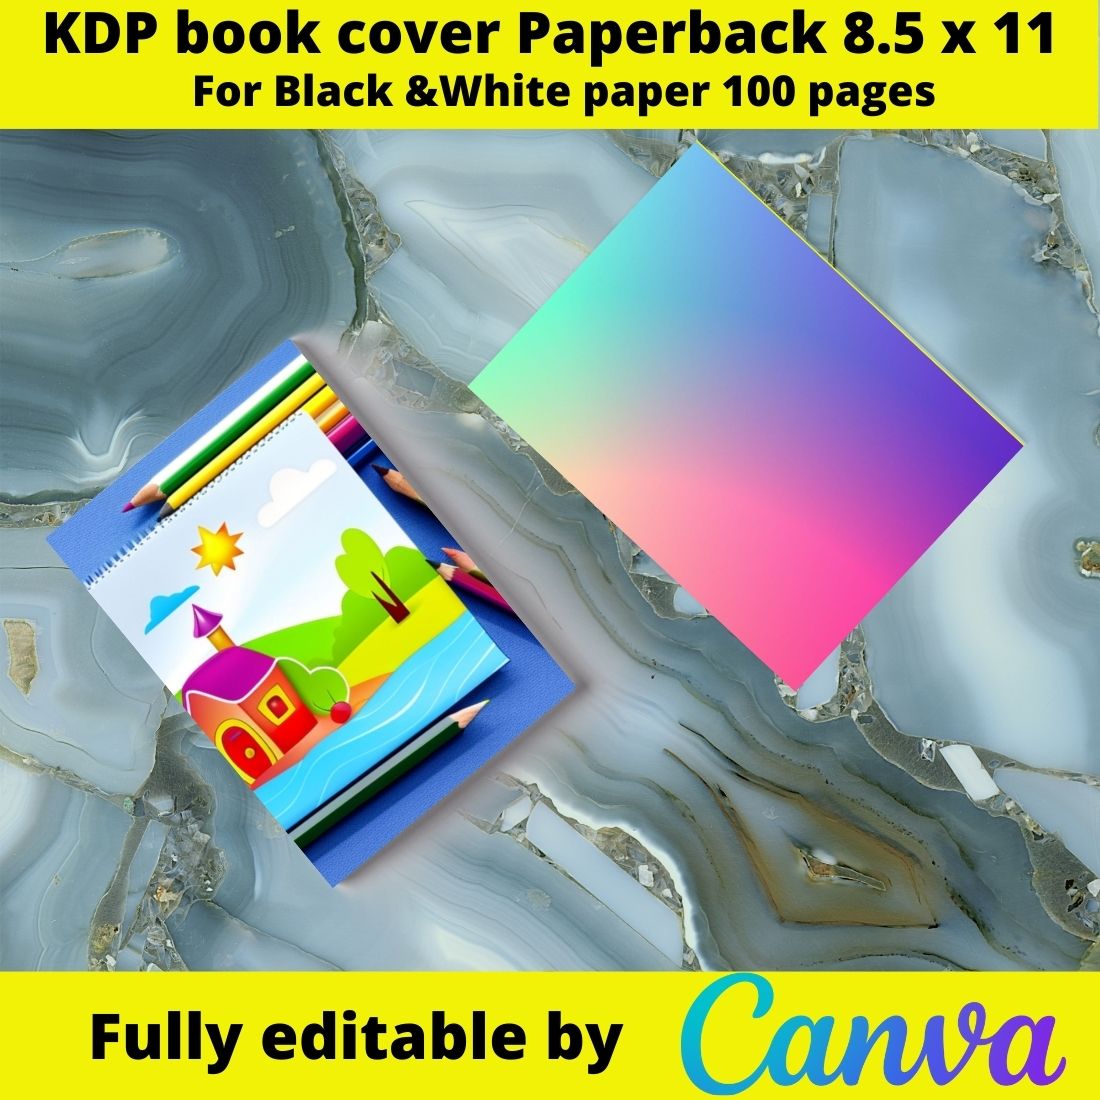 Picture of a book cover with a colorful background.